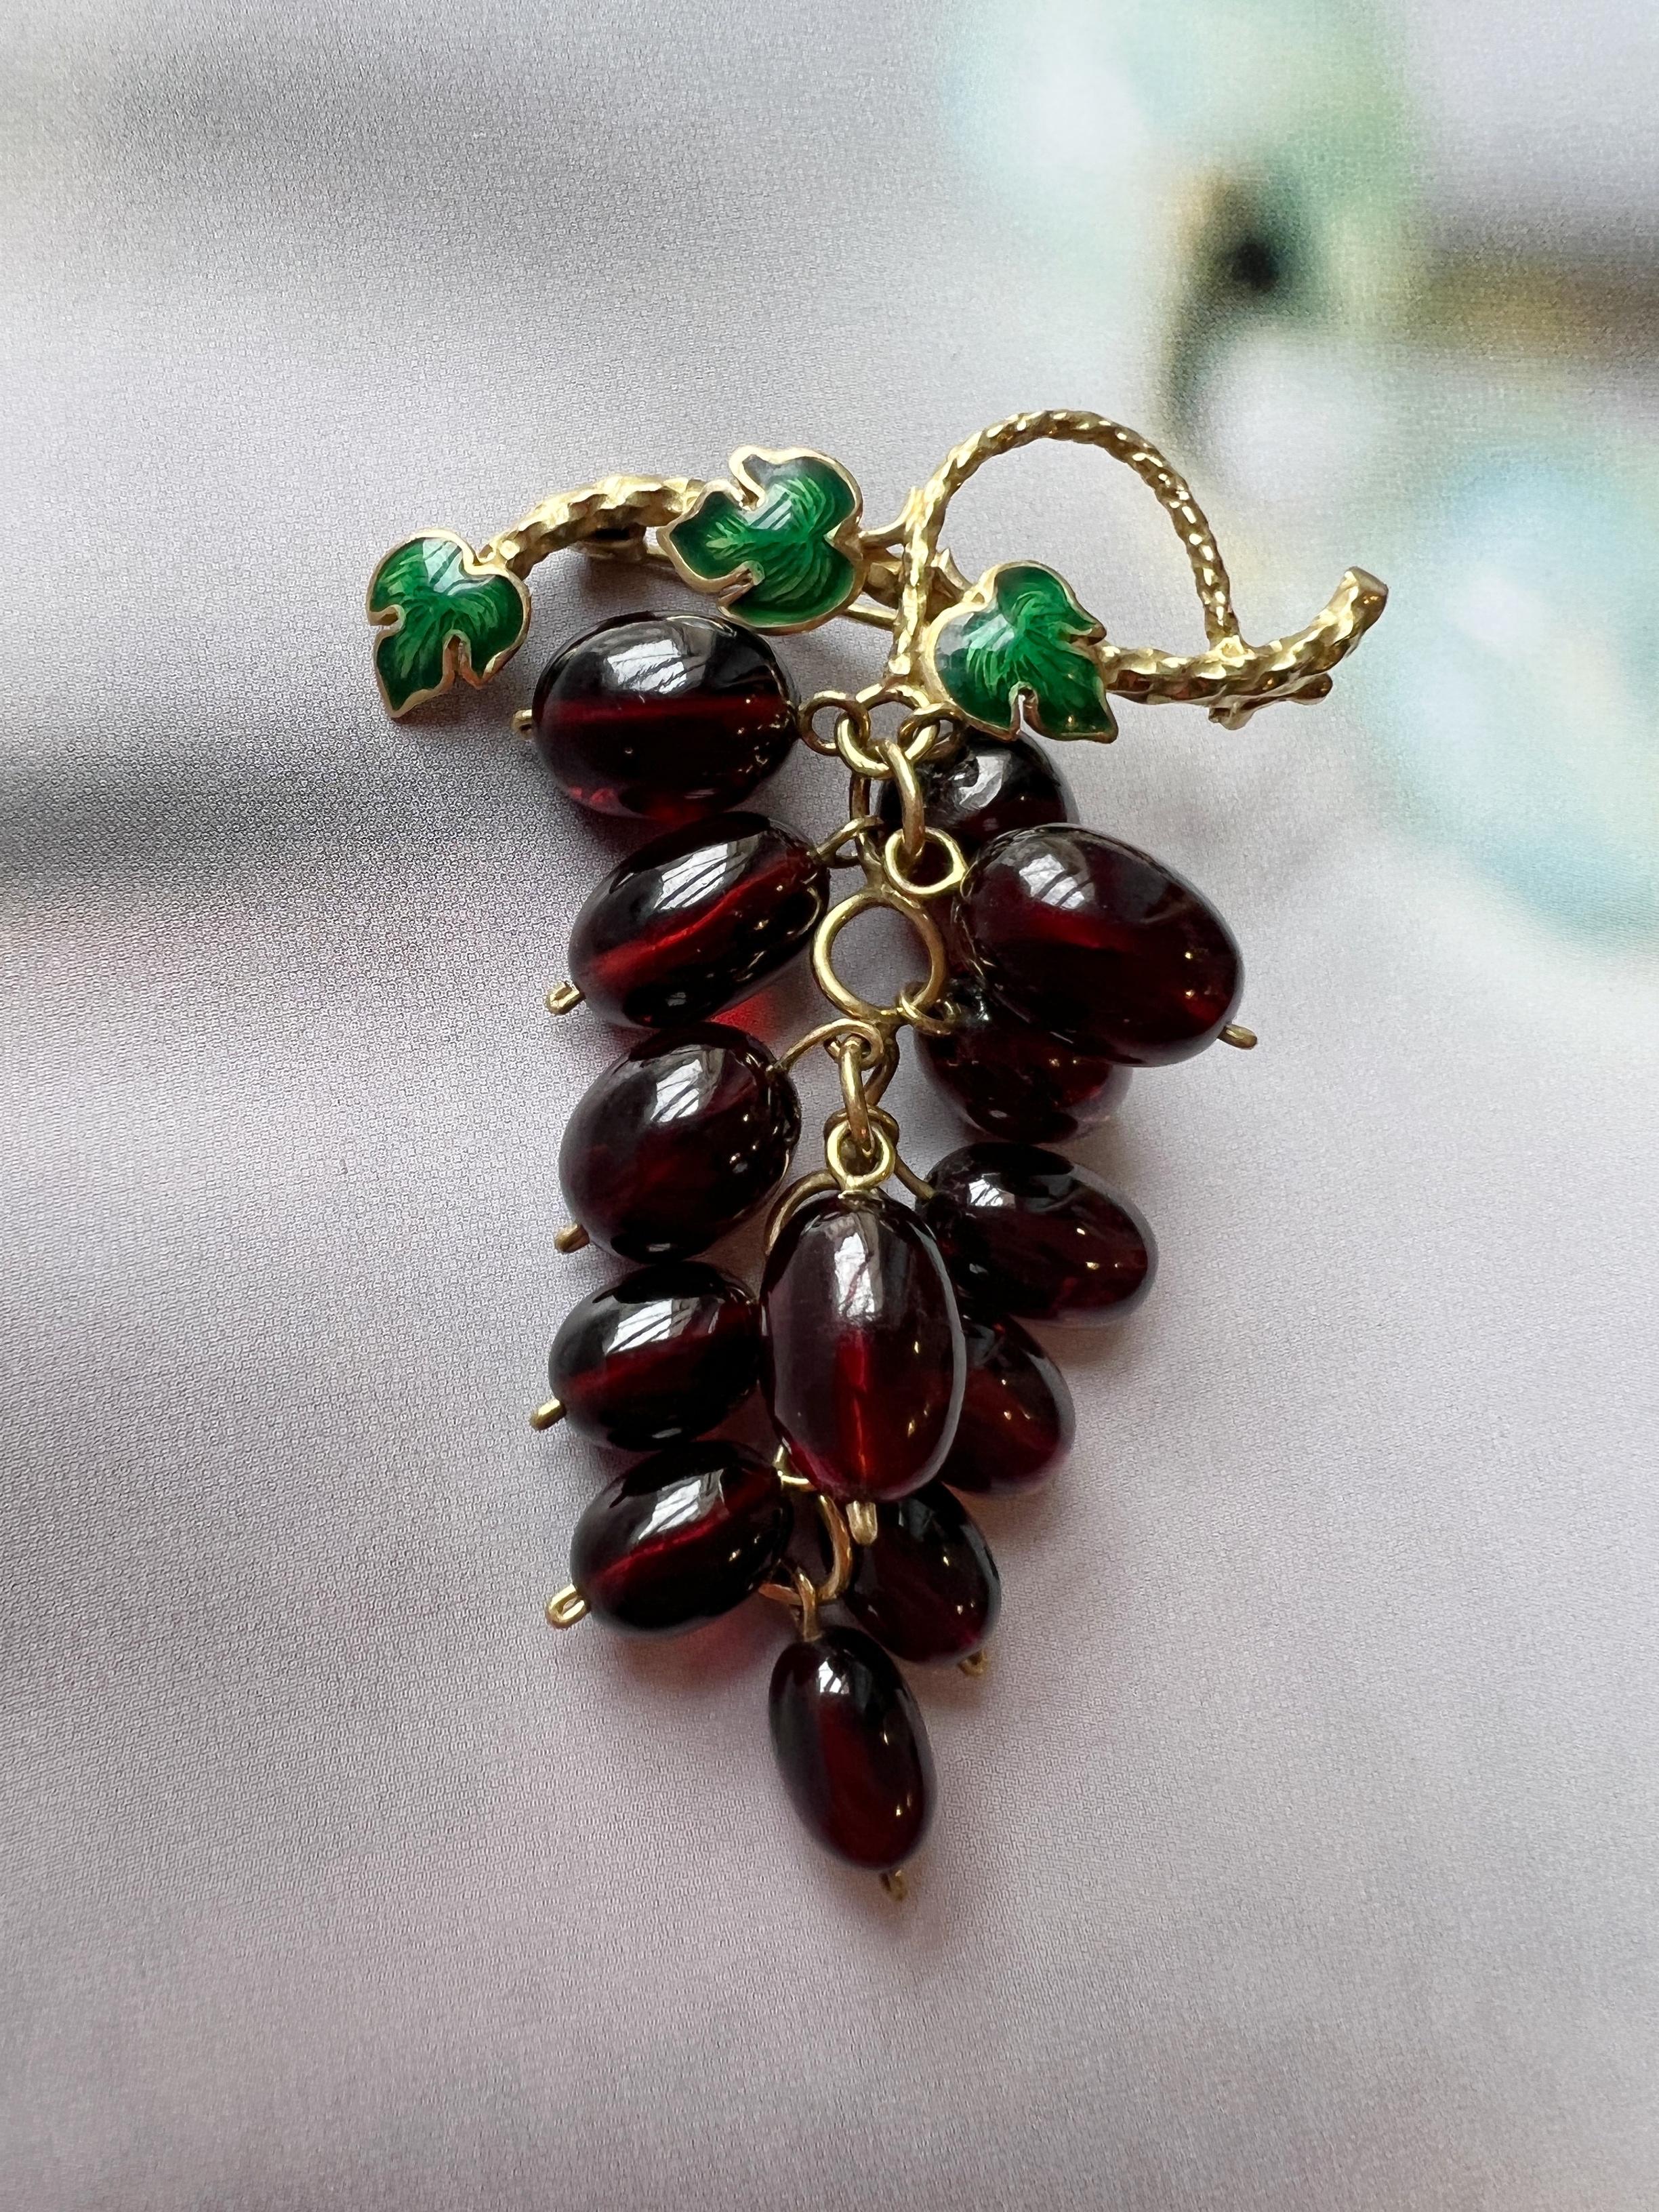 Sculptural, delightful and extremely skillfully crafted, this very rare and luxurious garnet grape brooch is among our favorite findings of the season!

This “delicious” brooch features a bunch of grapes made of 13 garnet cabochons in juicy deep red